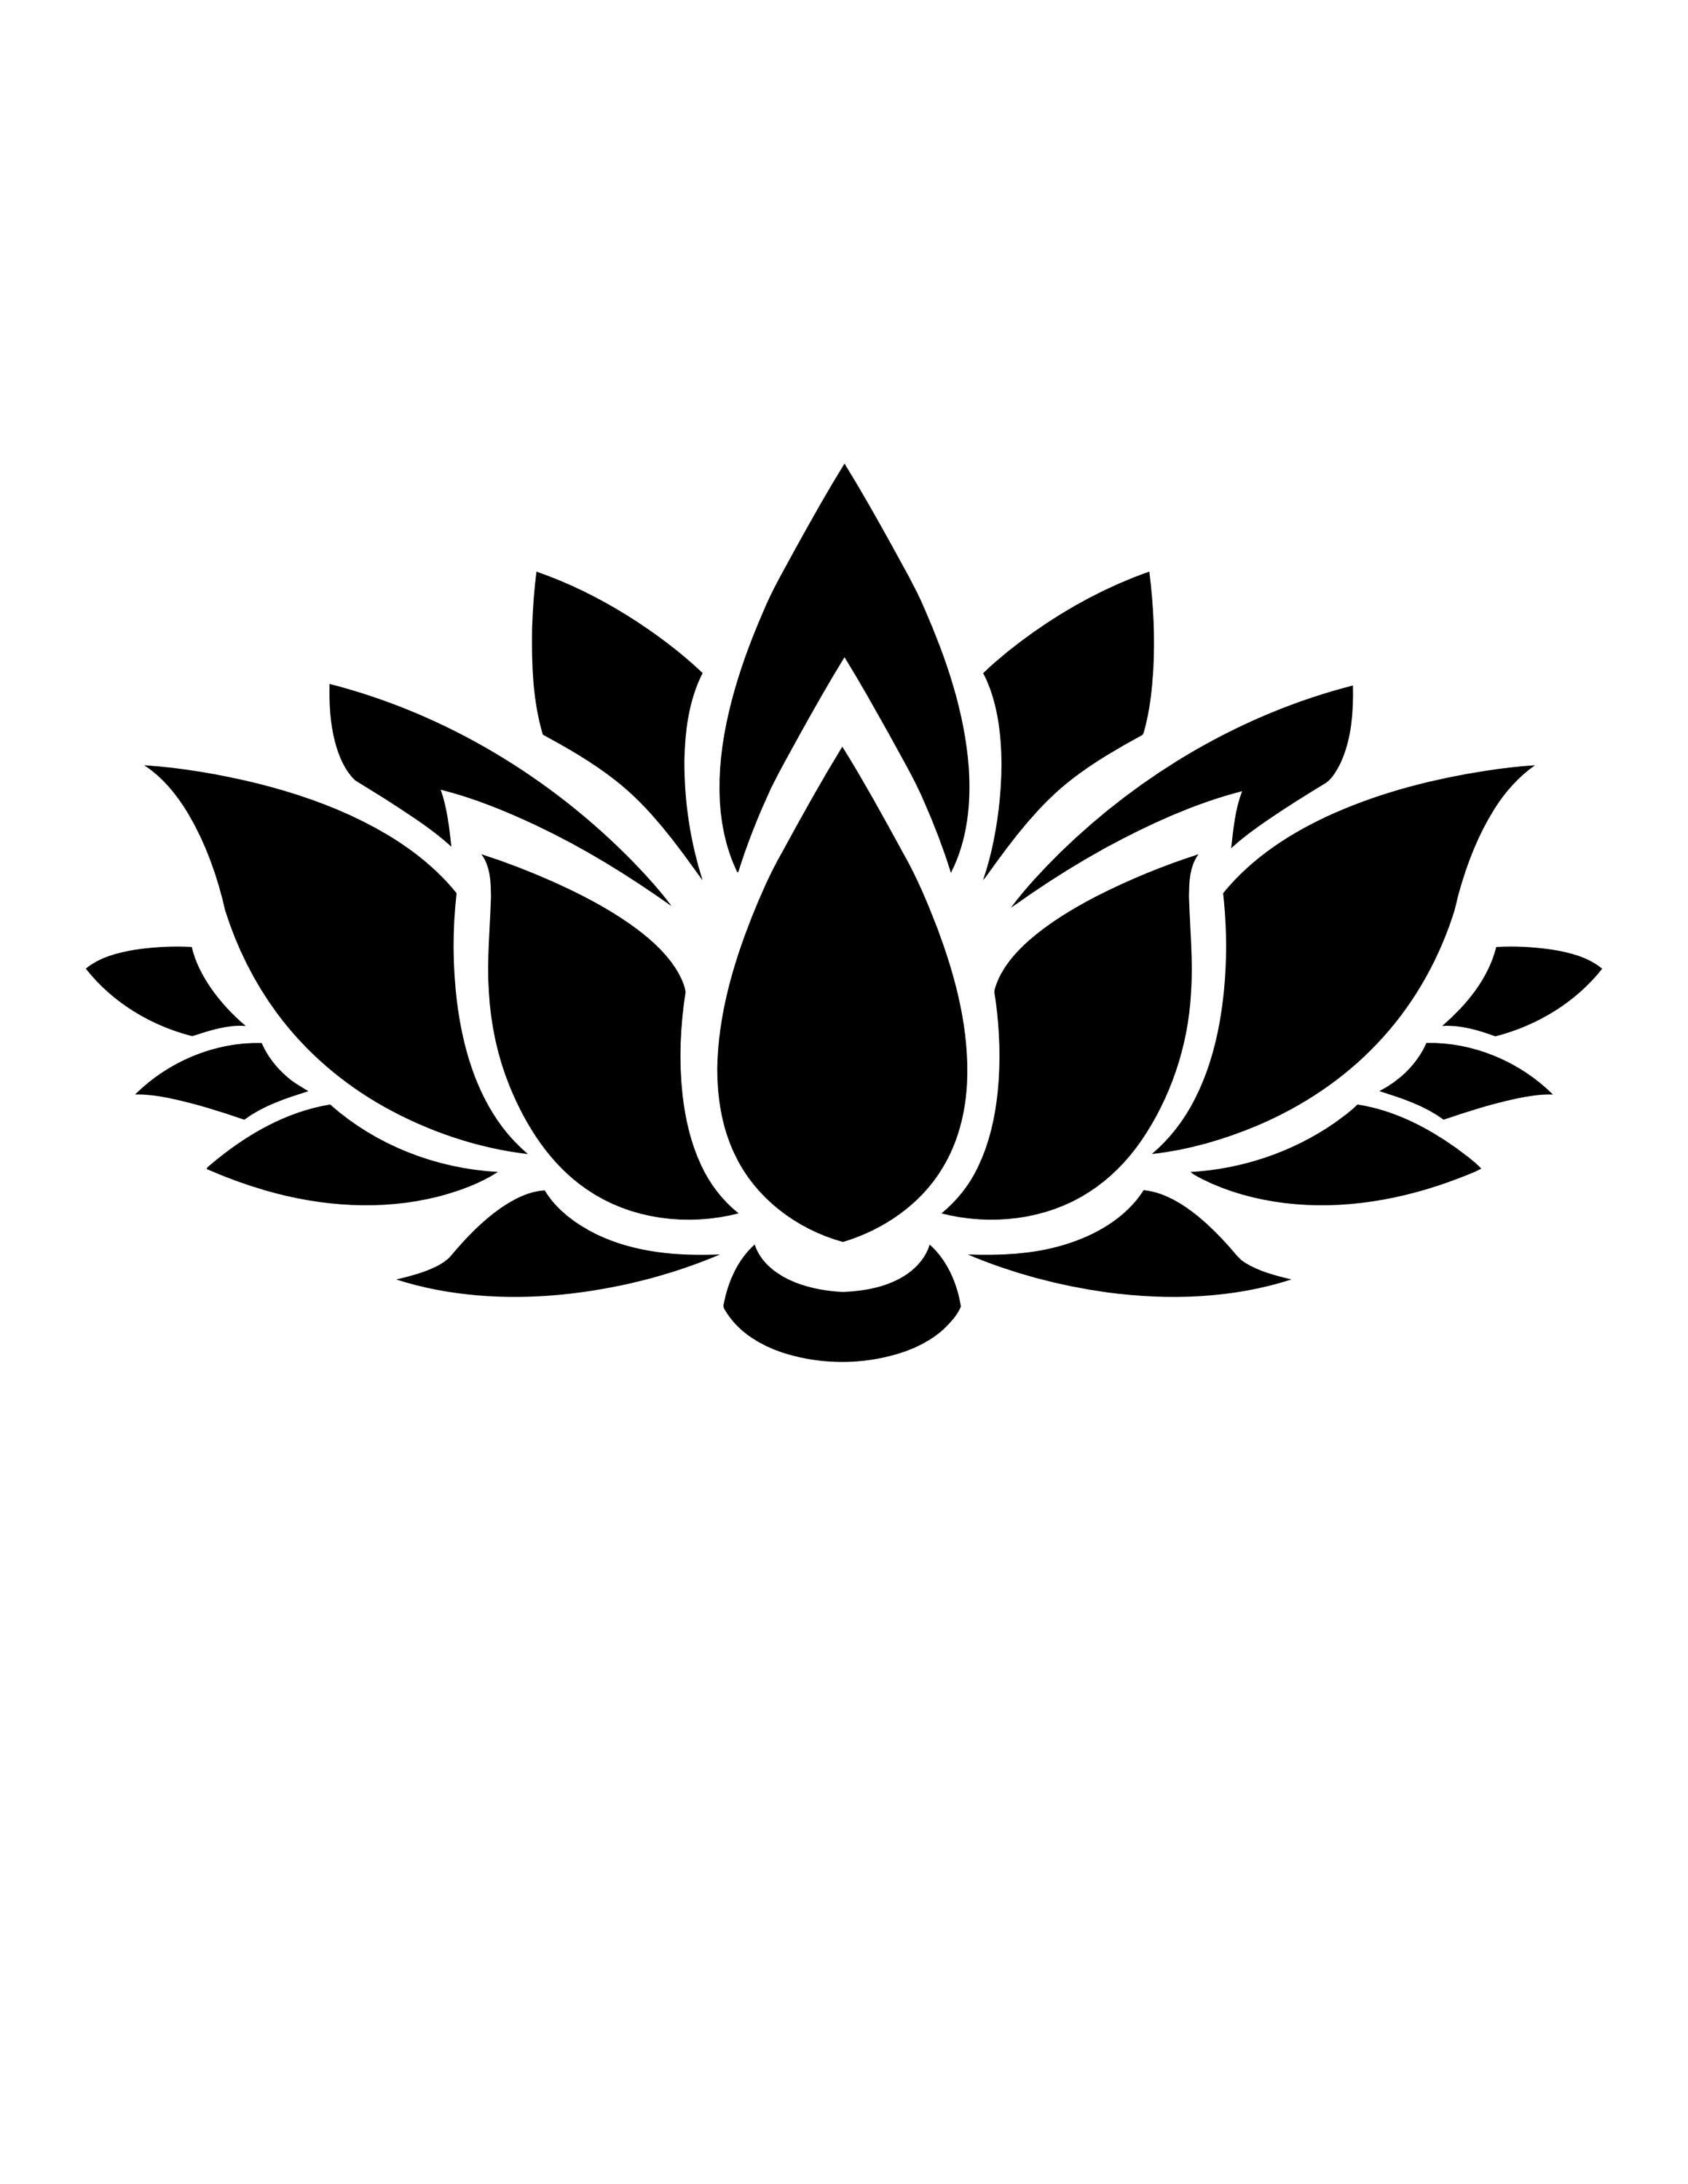 Pack of 3 Lotus Flower Stencils Made from 4 Ply Mat Board, 16x20, 11x14